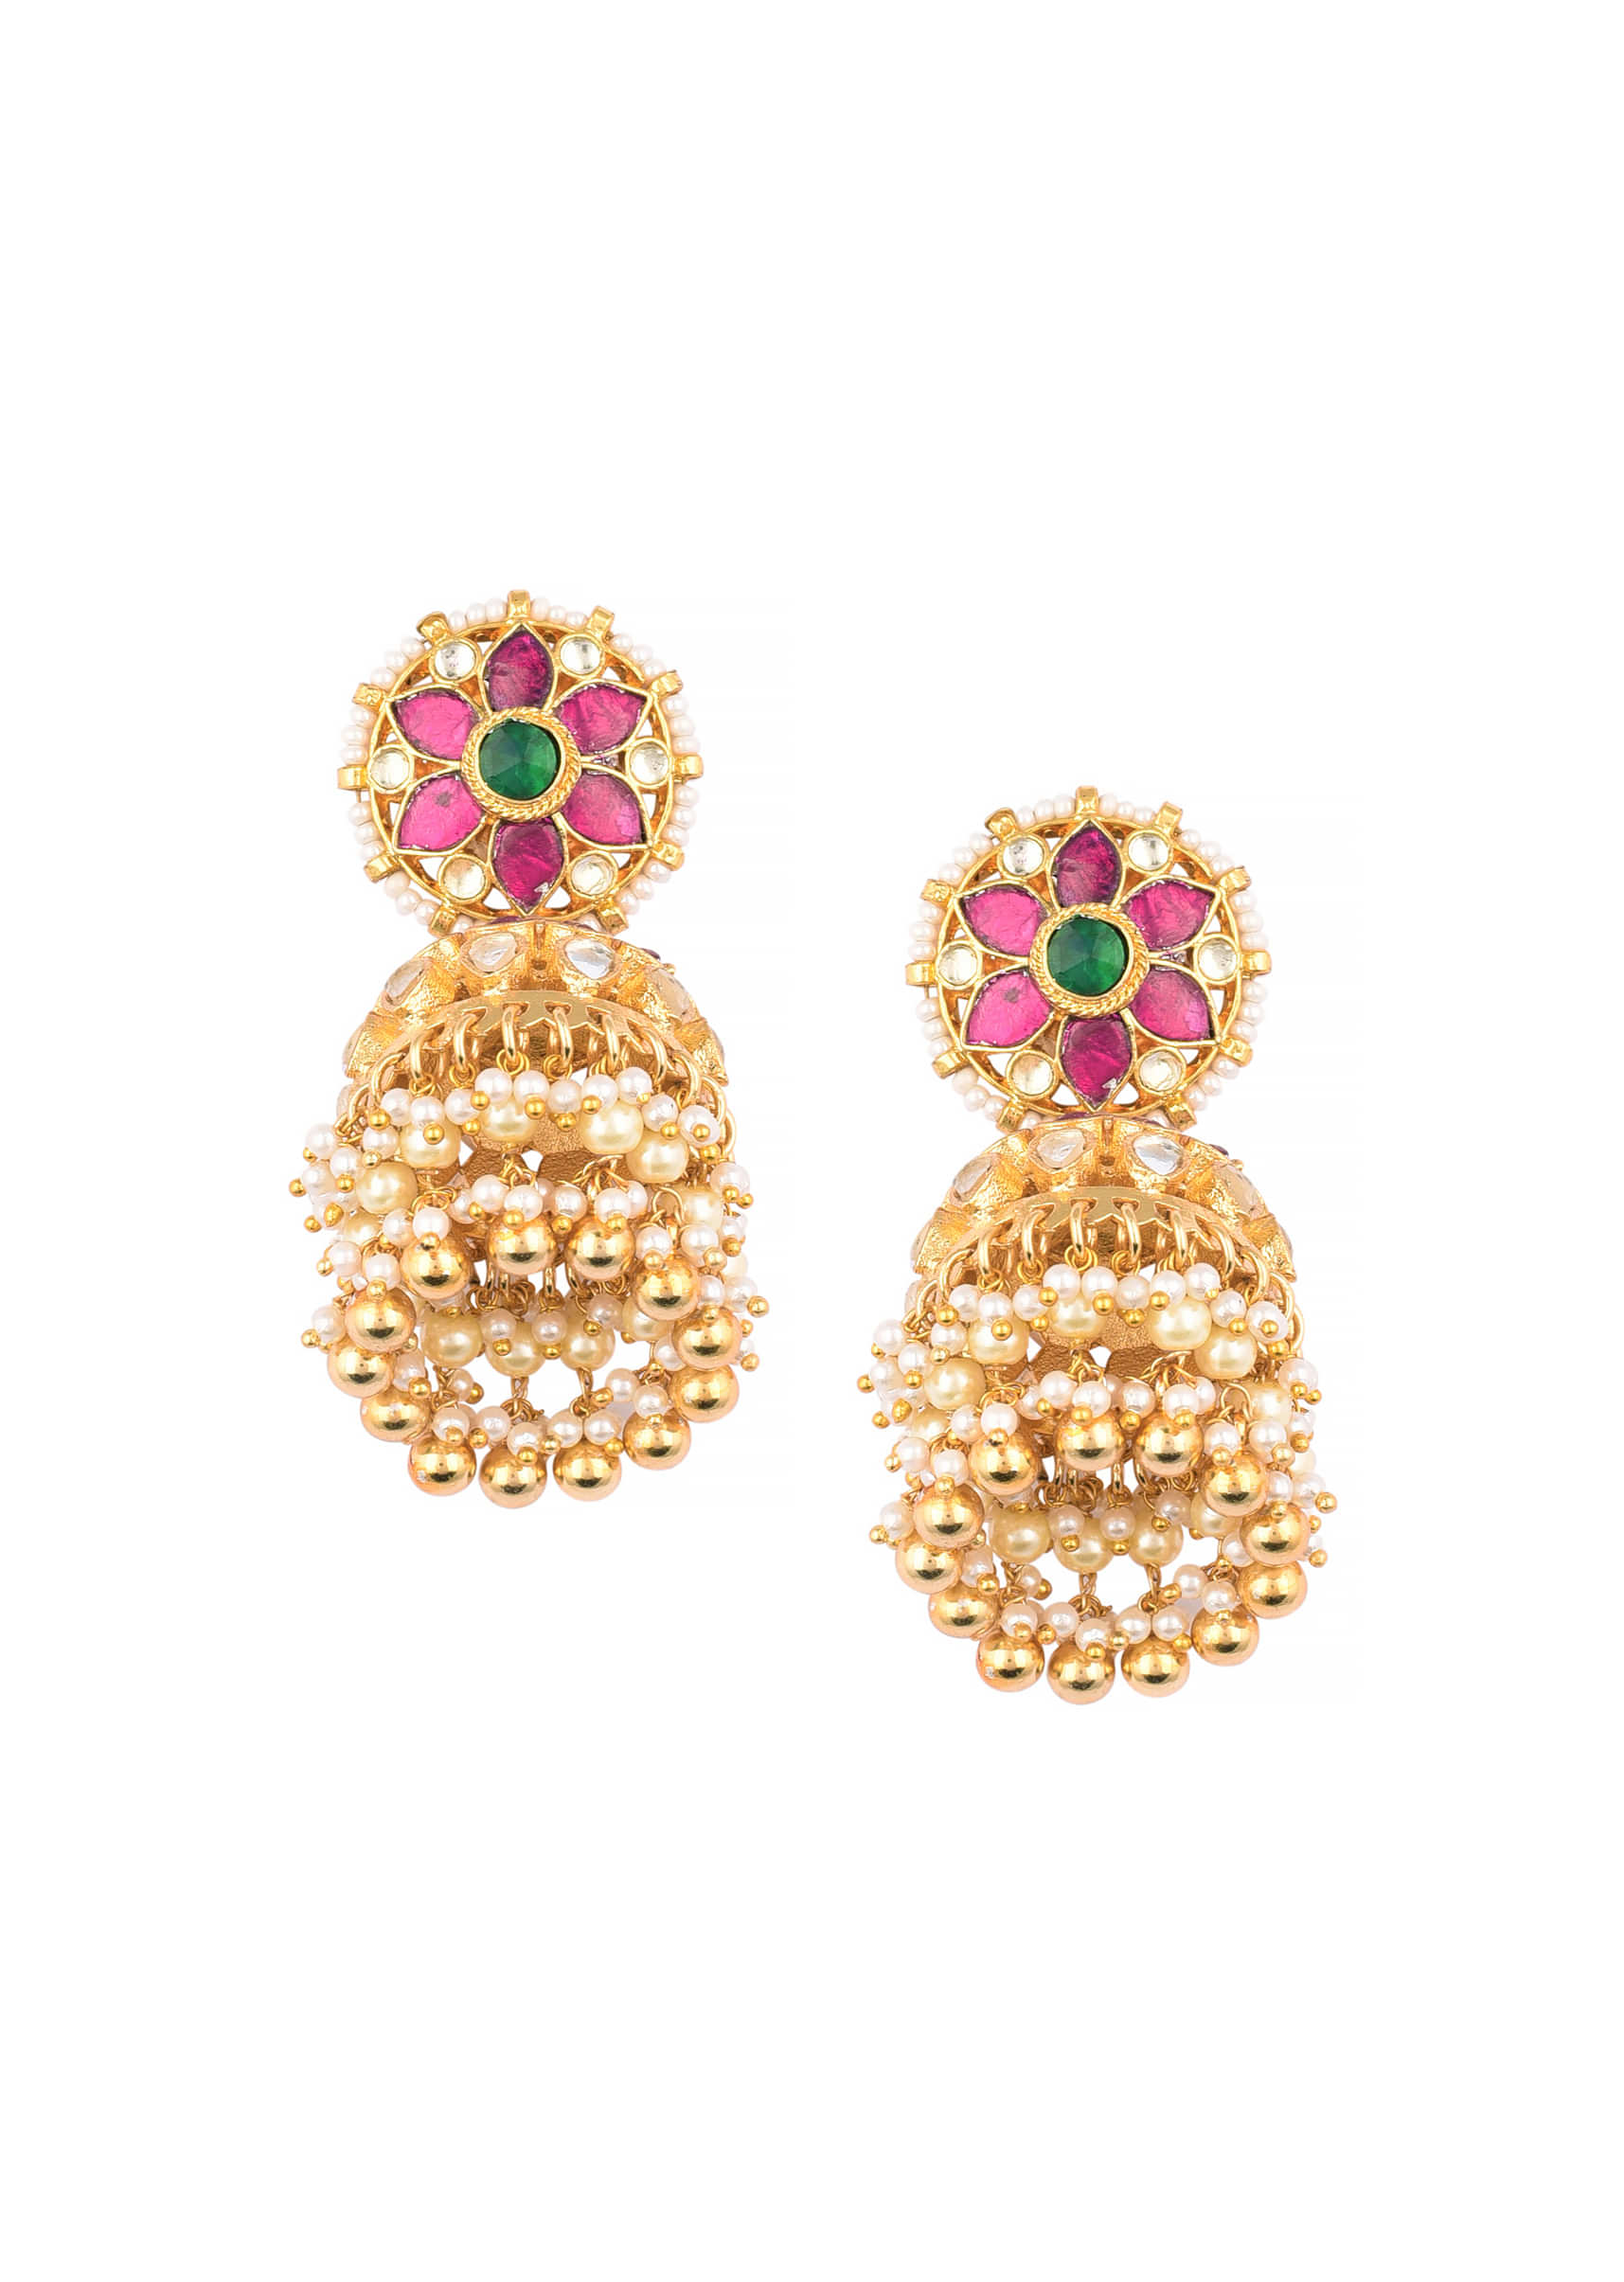 Gold Finish Kundan Earrings With Synthetic Stones And Beads